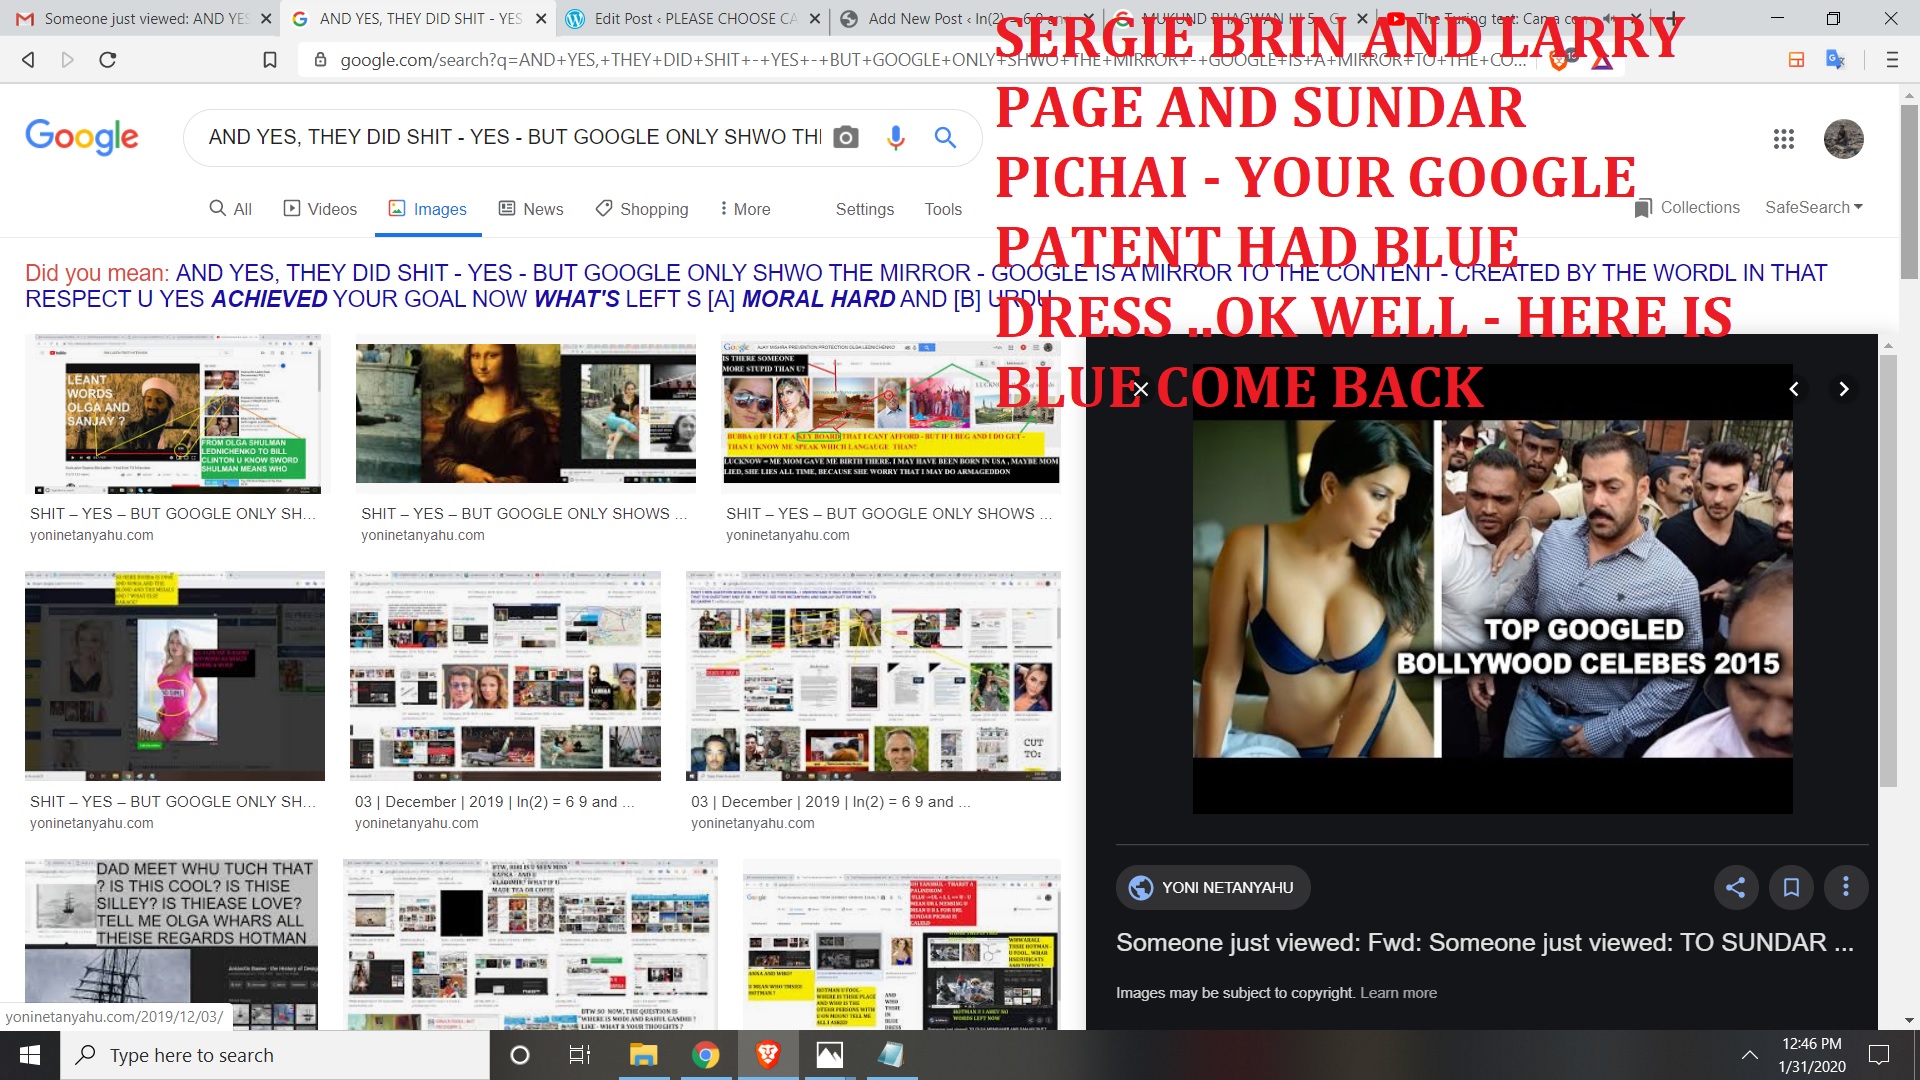 SERGIE BRIN AND LARRY PAGE AND SUNDAR PICHAI - YOUR GOOGLE PATENT HAD BLUE DRESS ..OK WELL - HERE IS BLUE COME BACK